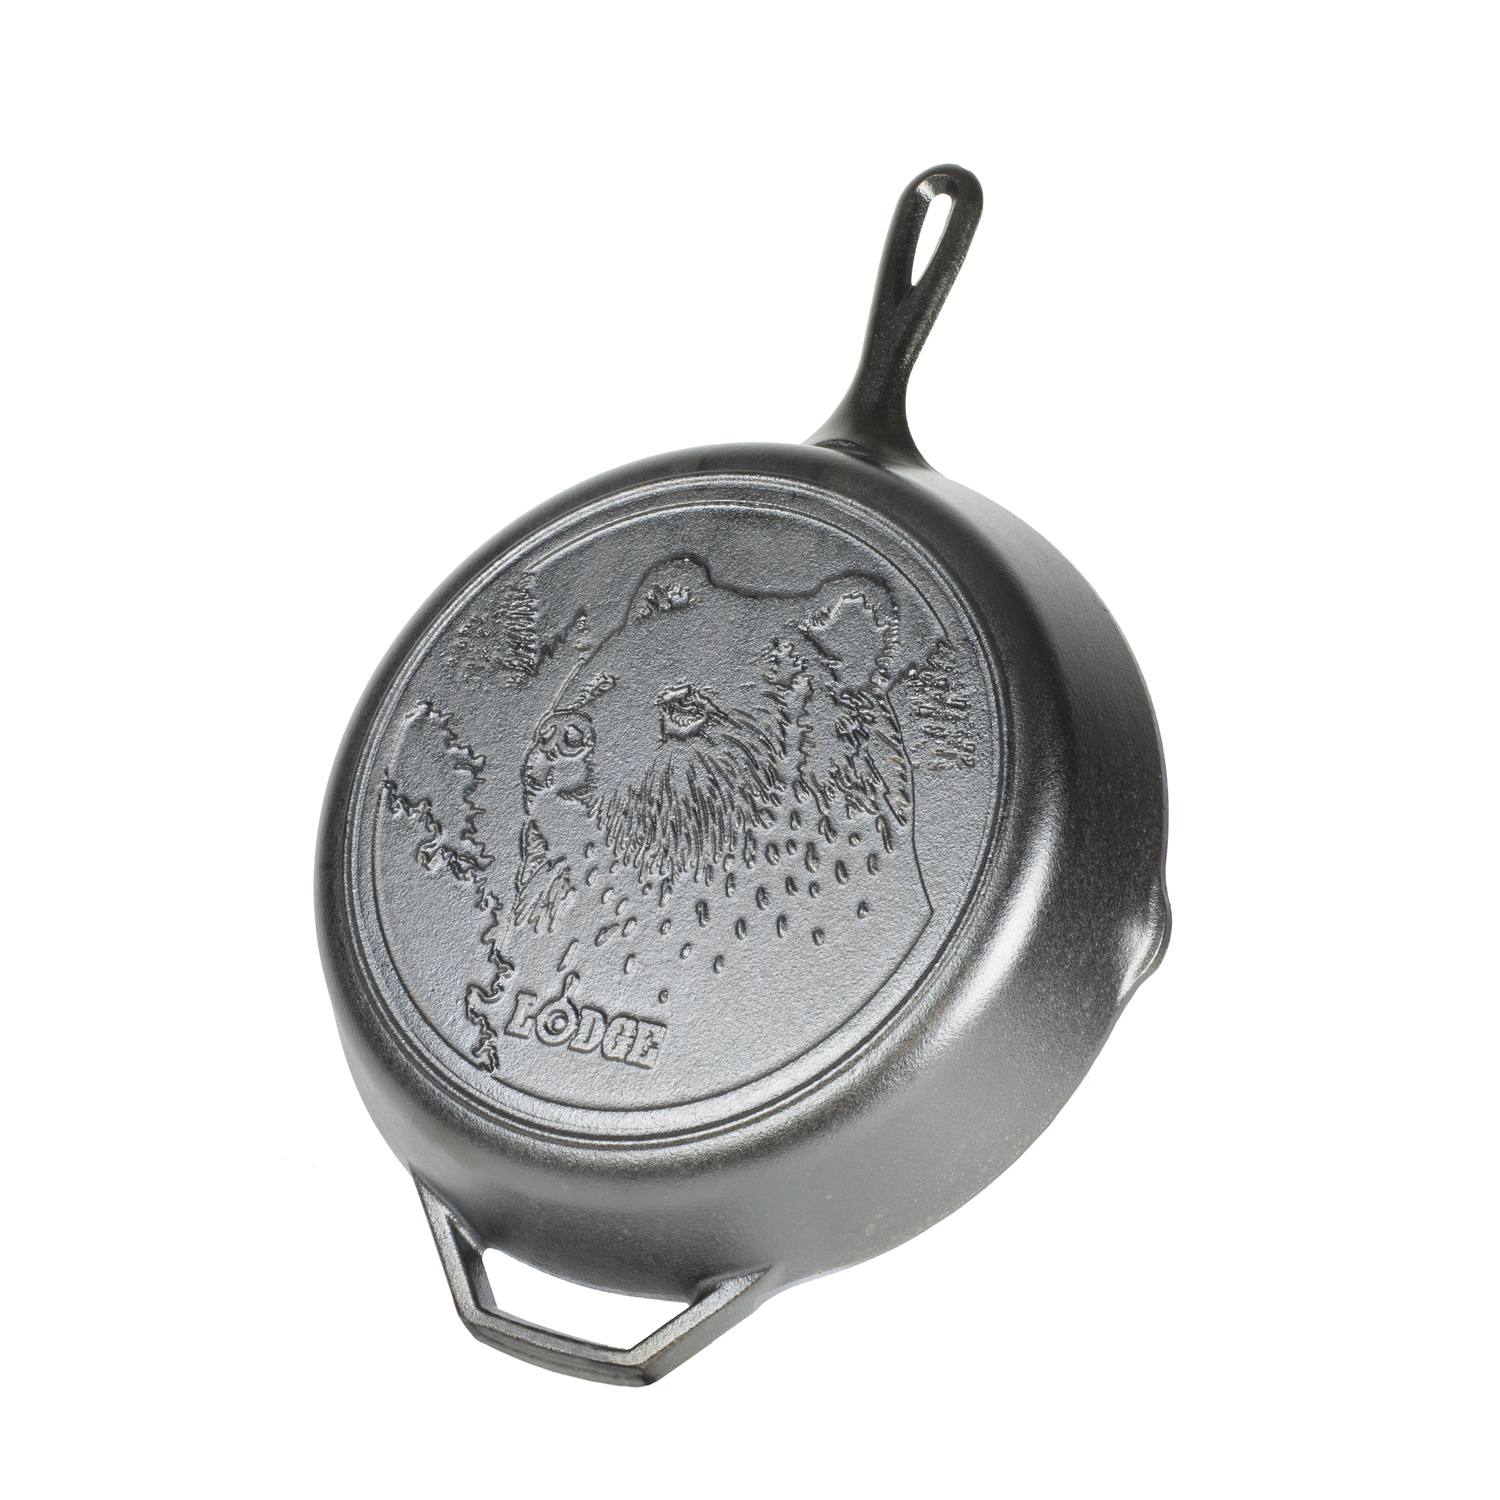 Lodge 0.5 qt. Cast Iron Melting Pot in Black with Silicone Brush